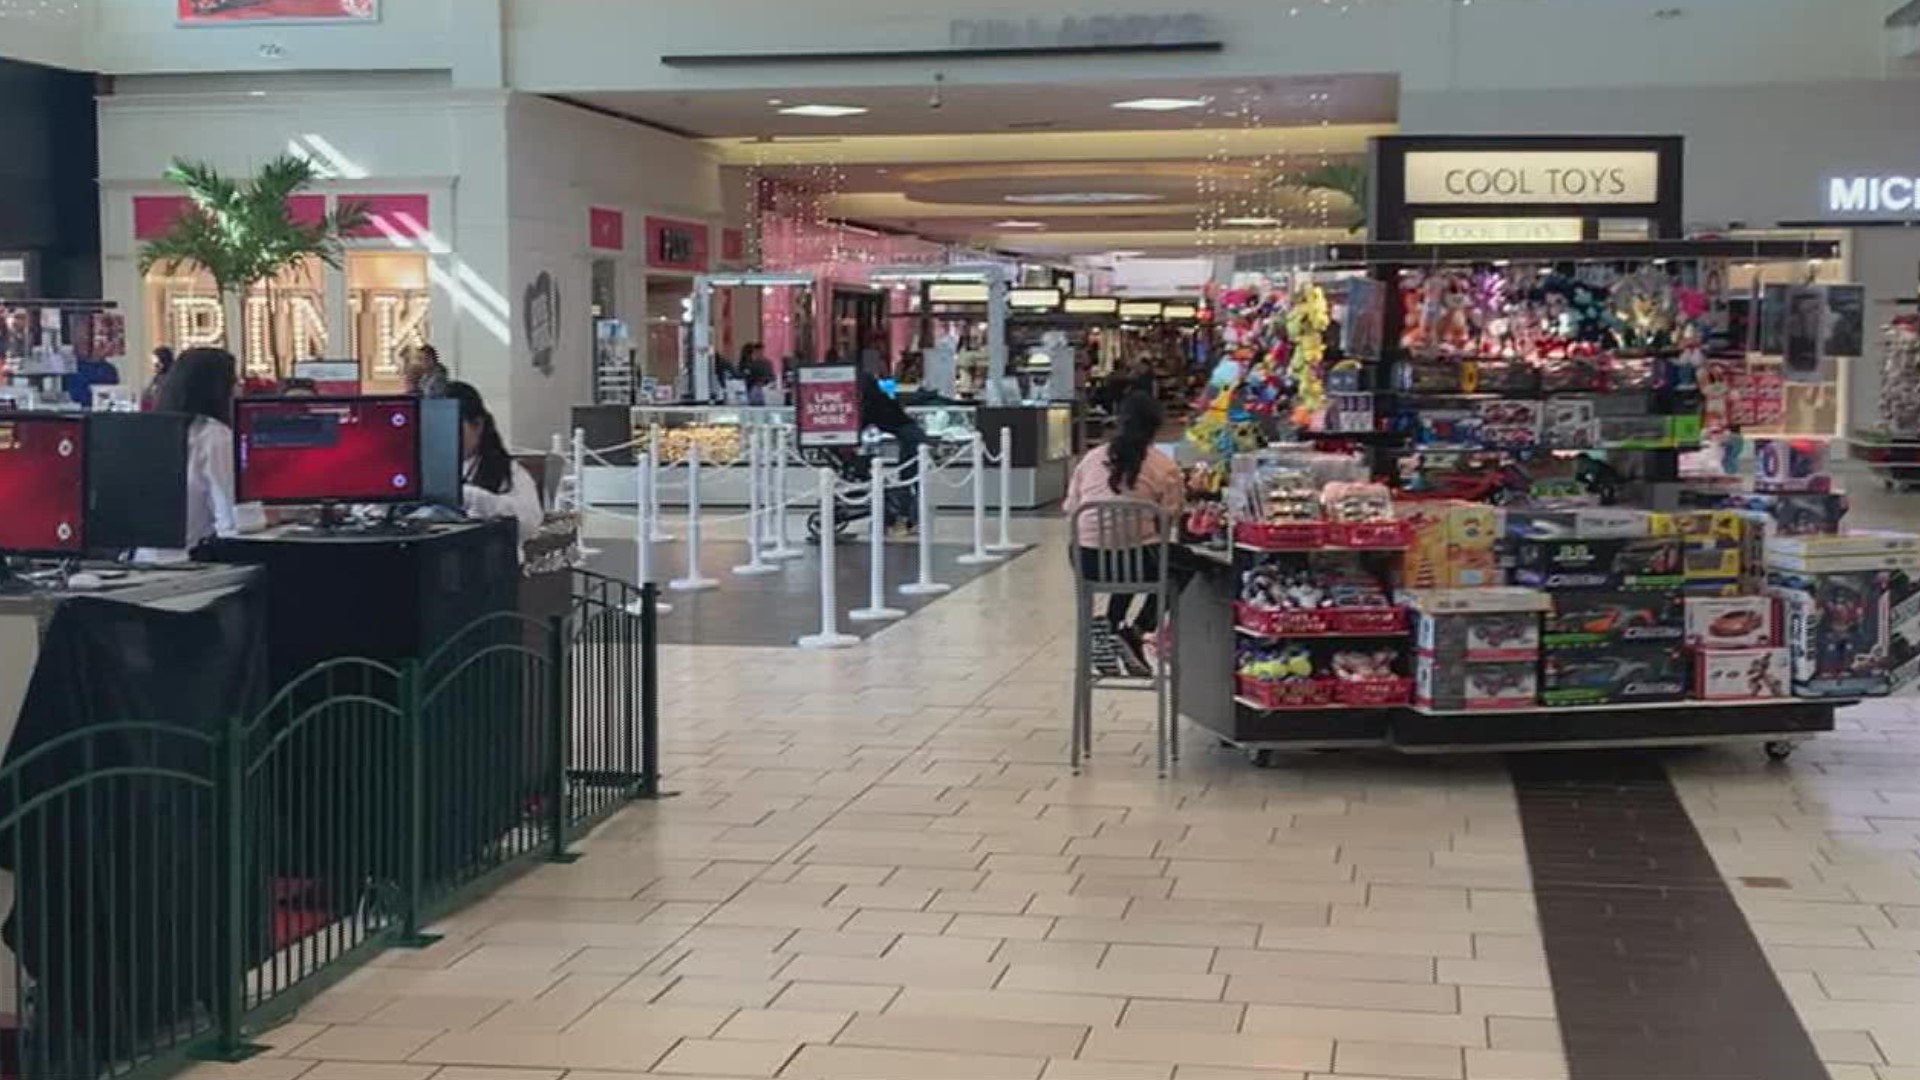 After losing tenants to COVID-19-related closures, the mall has been able to attract some big-name retailers and restaurants.